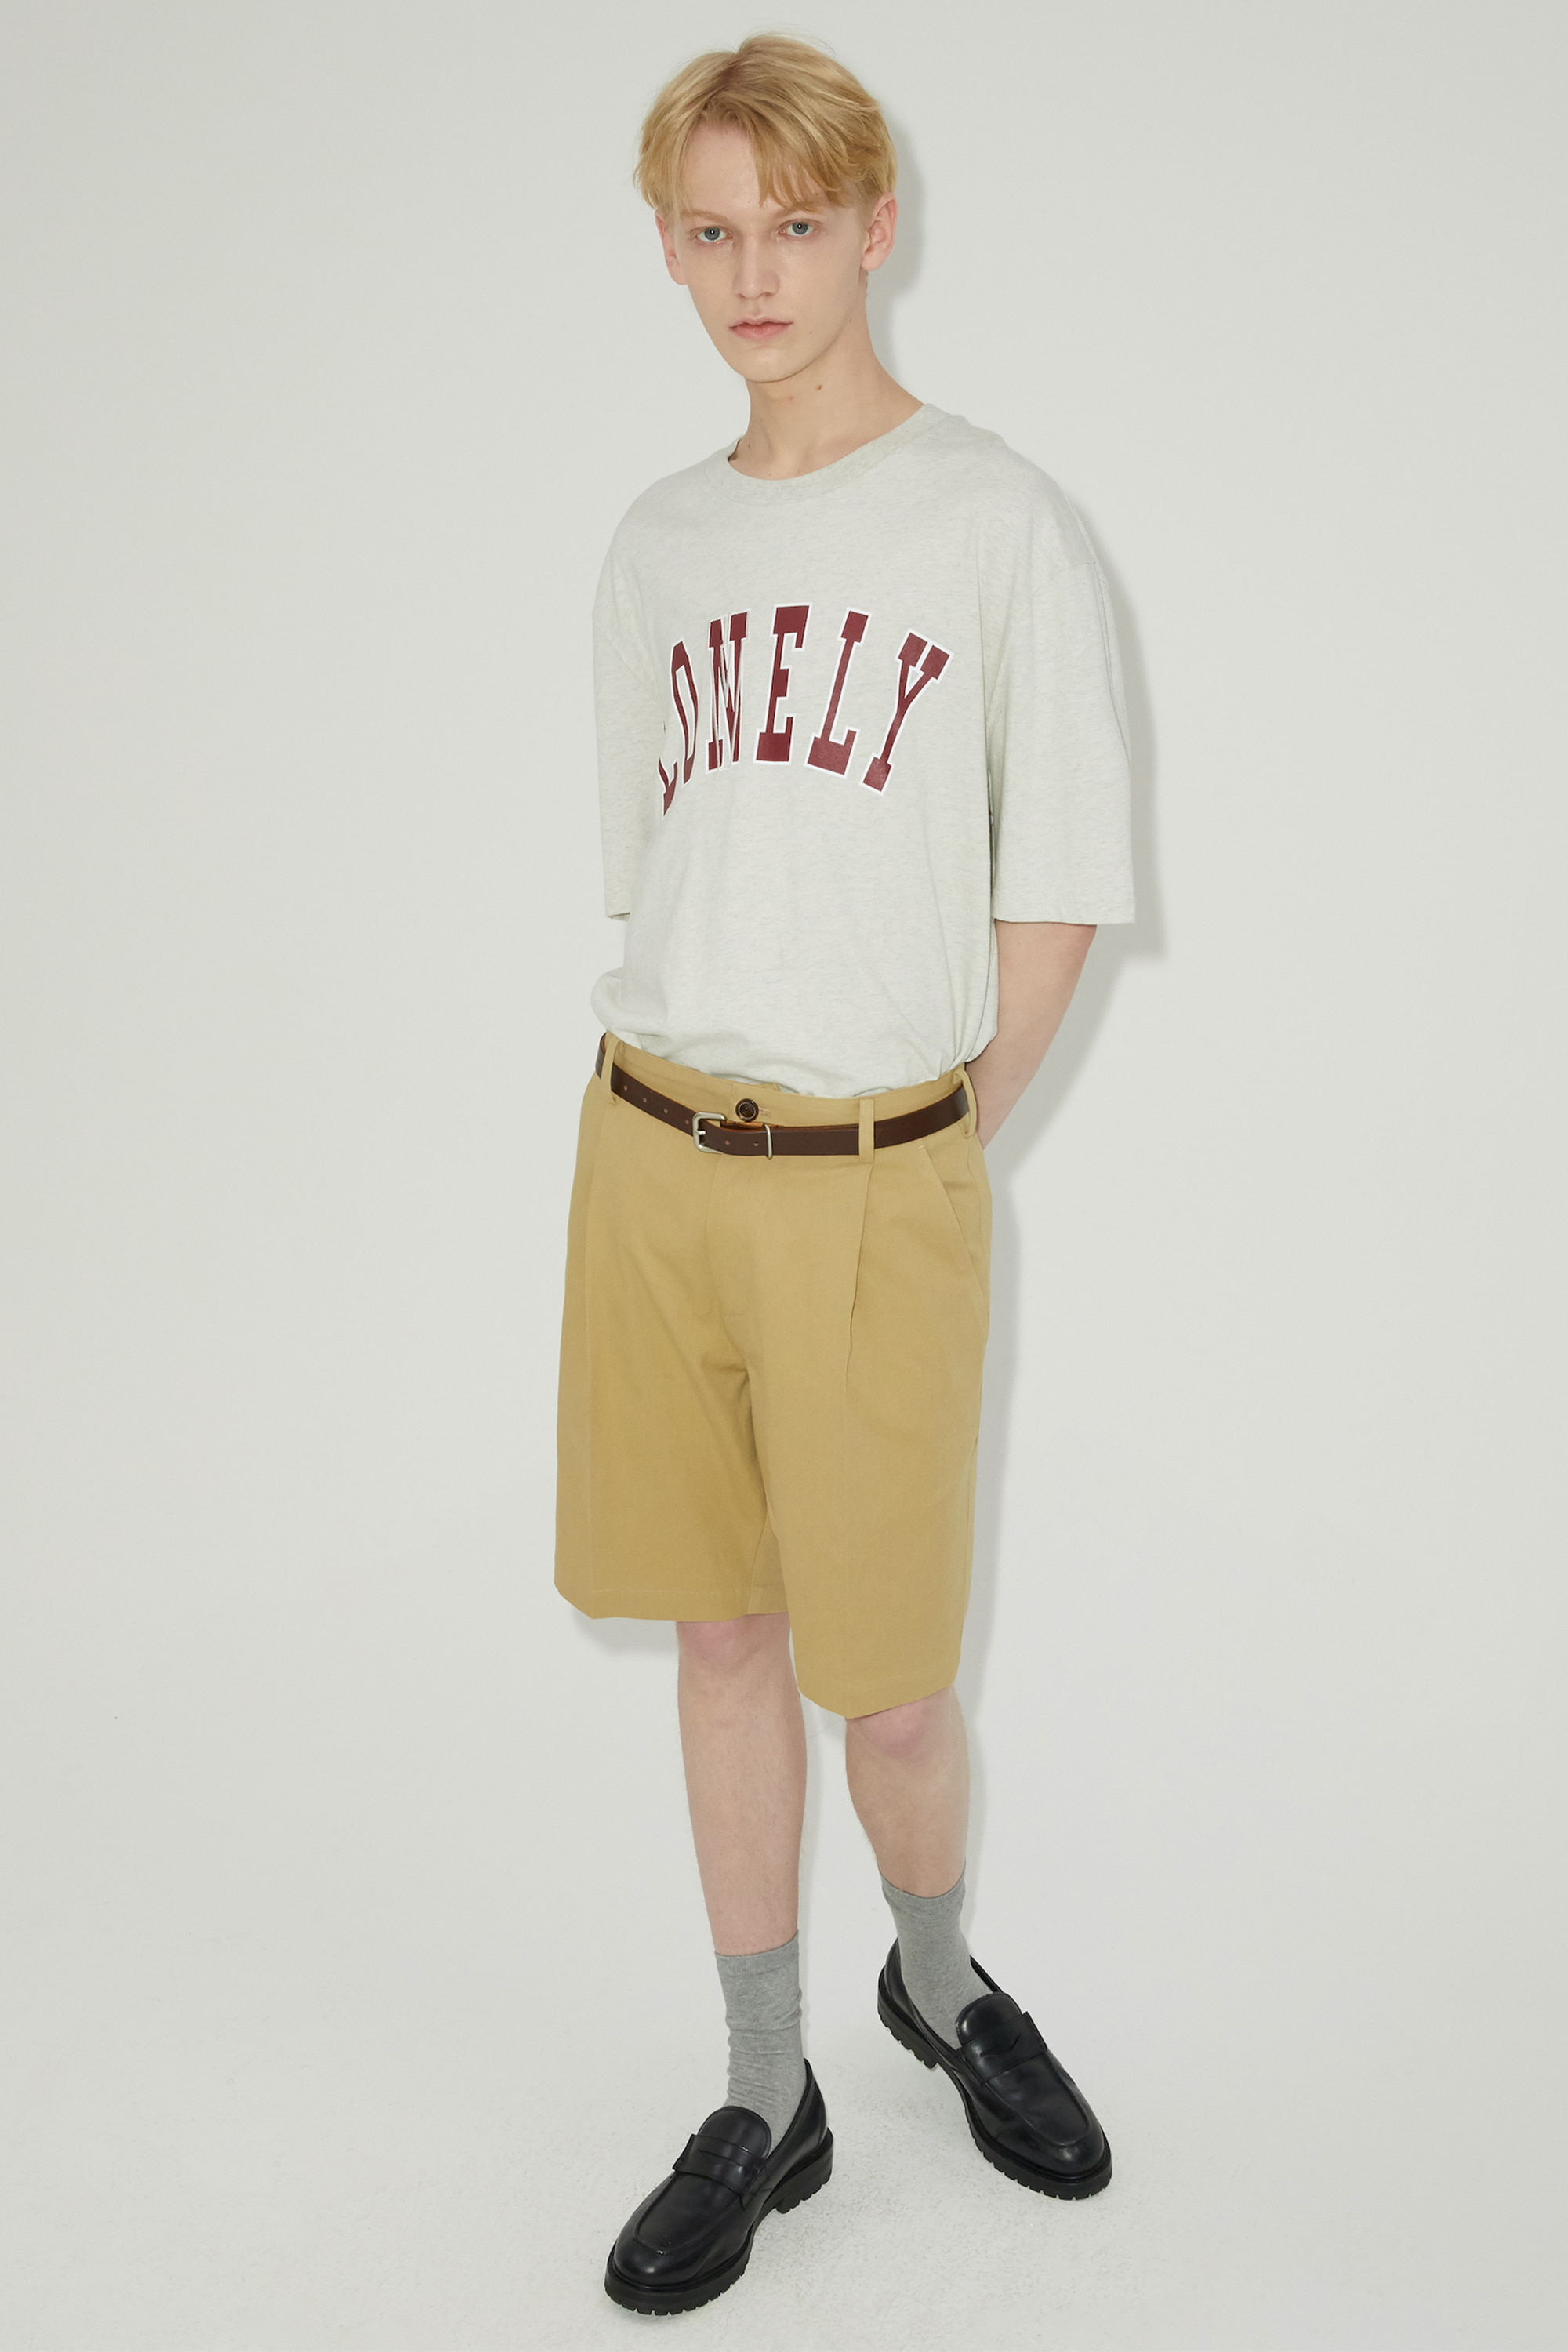 LONELY/LOVELY SHORT SLEEVE T SHIRT OATMEAL